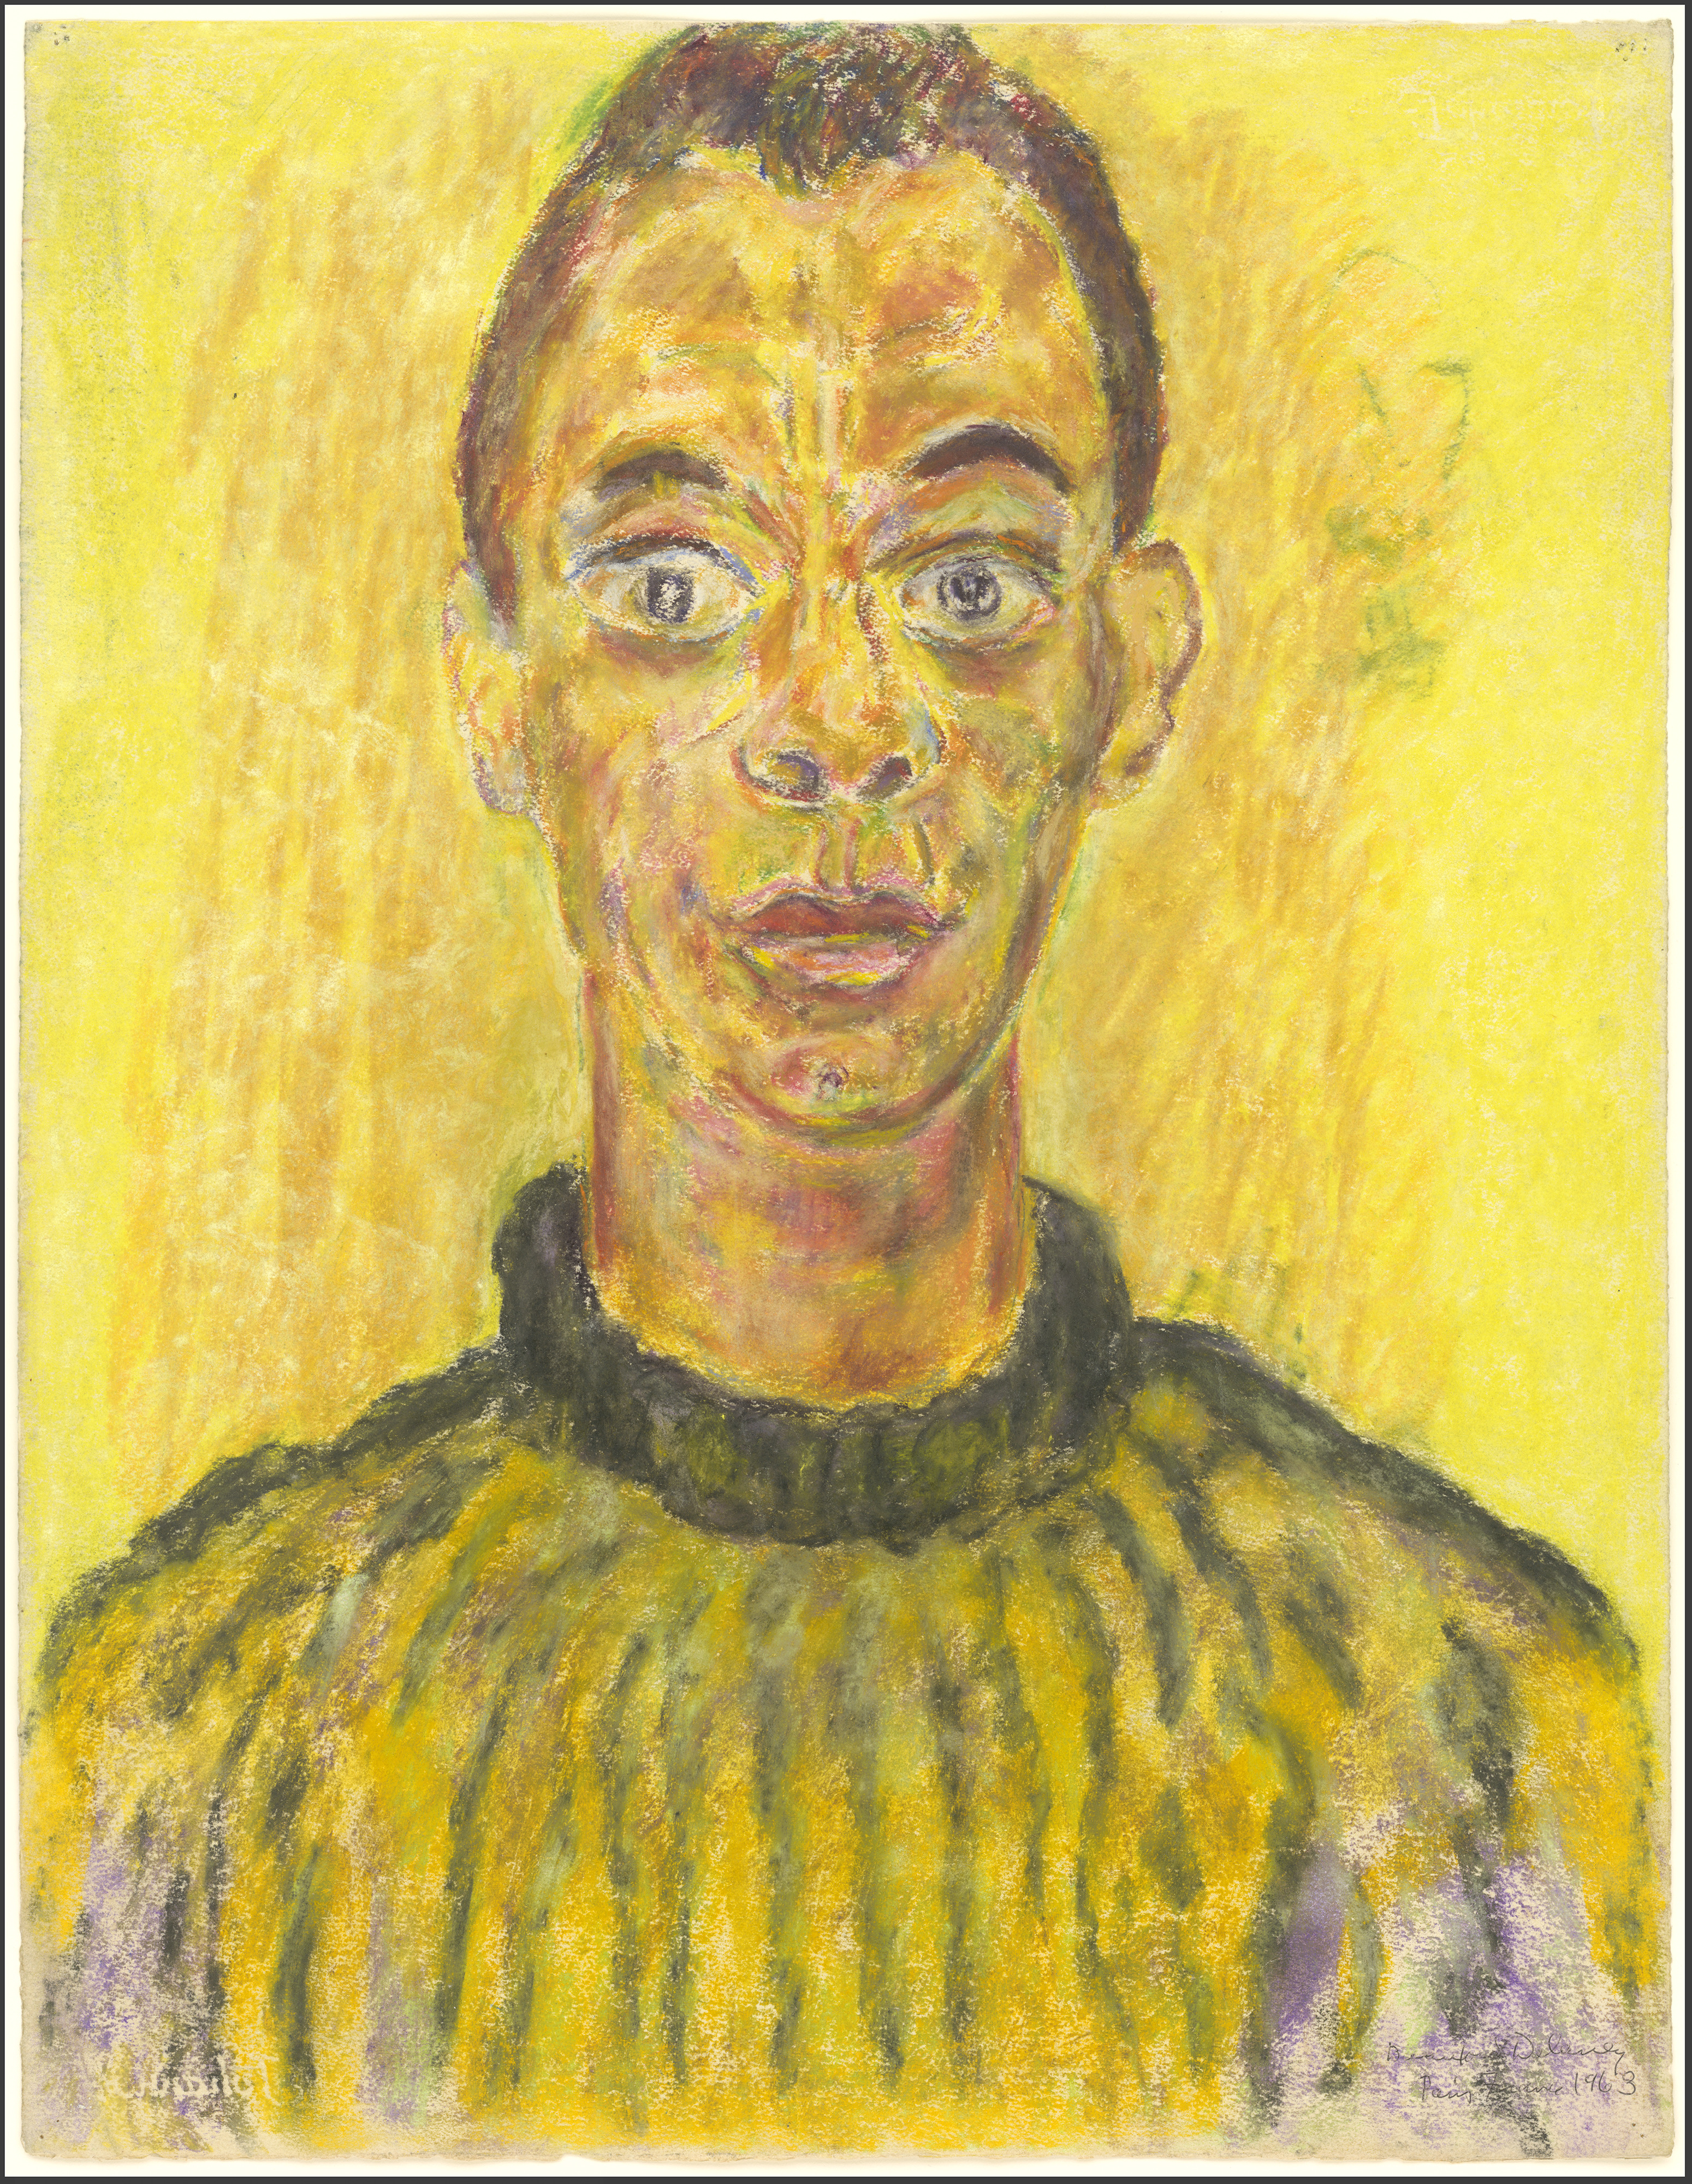 Painted, stylized portrait with bright yellow background of a man with long oval face.face.